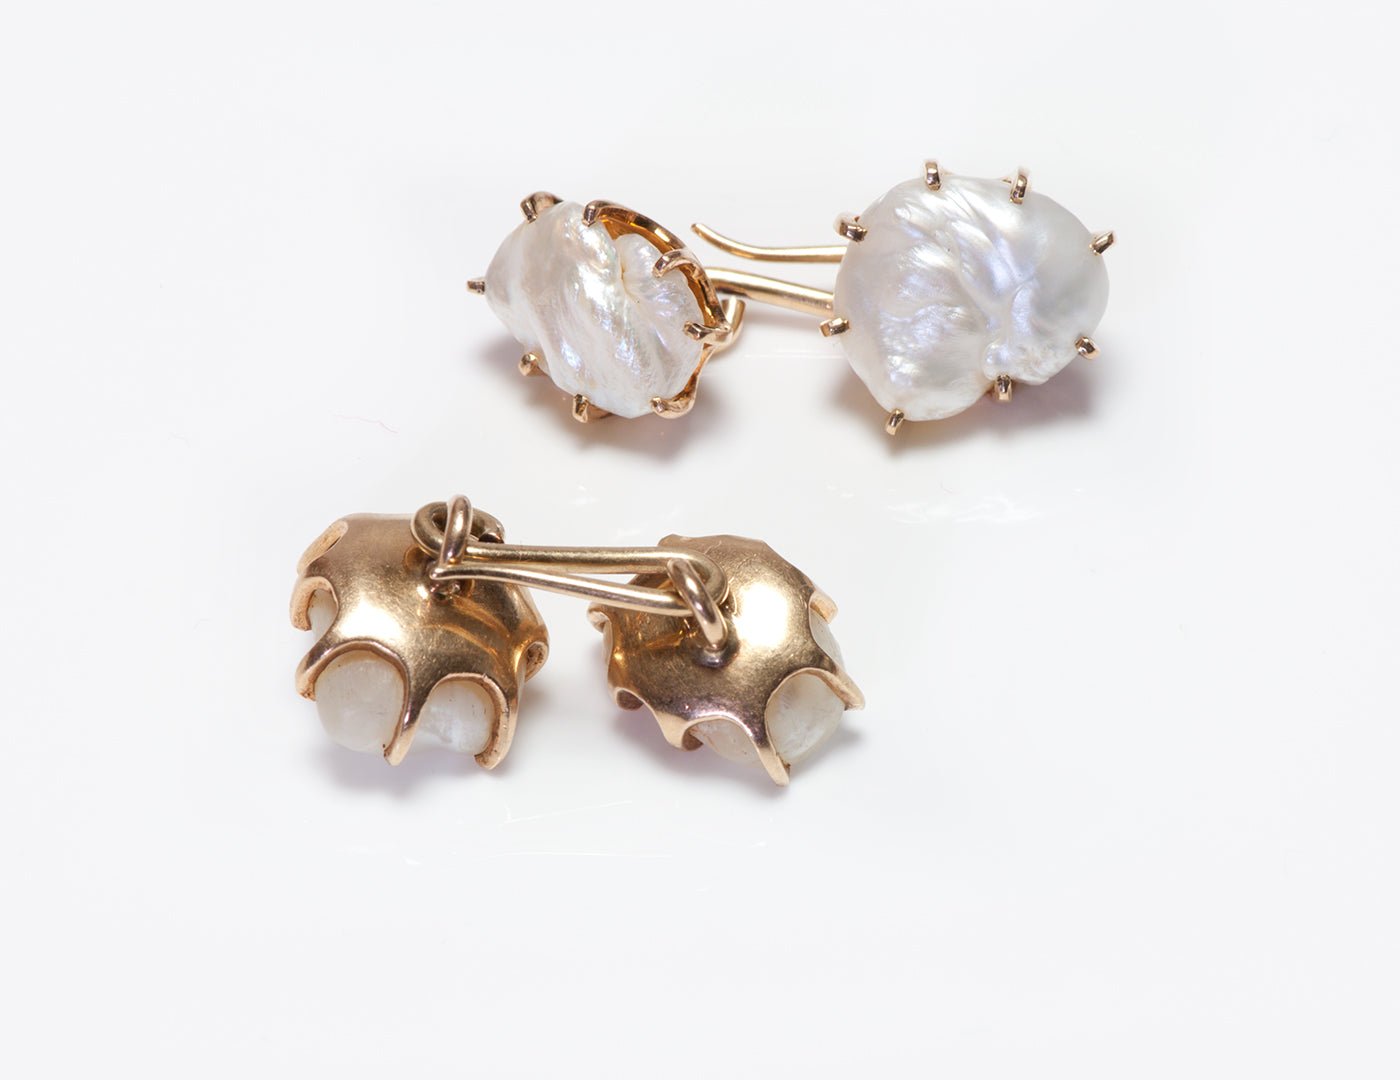 Antique Gold Fresh Water Pearl Cufflinks - DSF Antique Jewelry